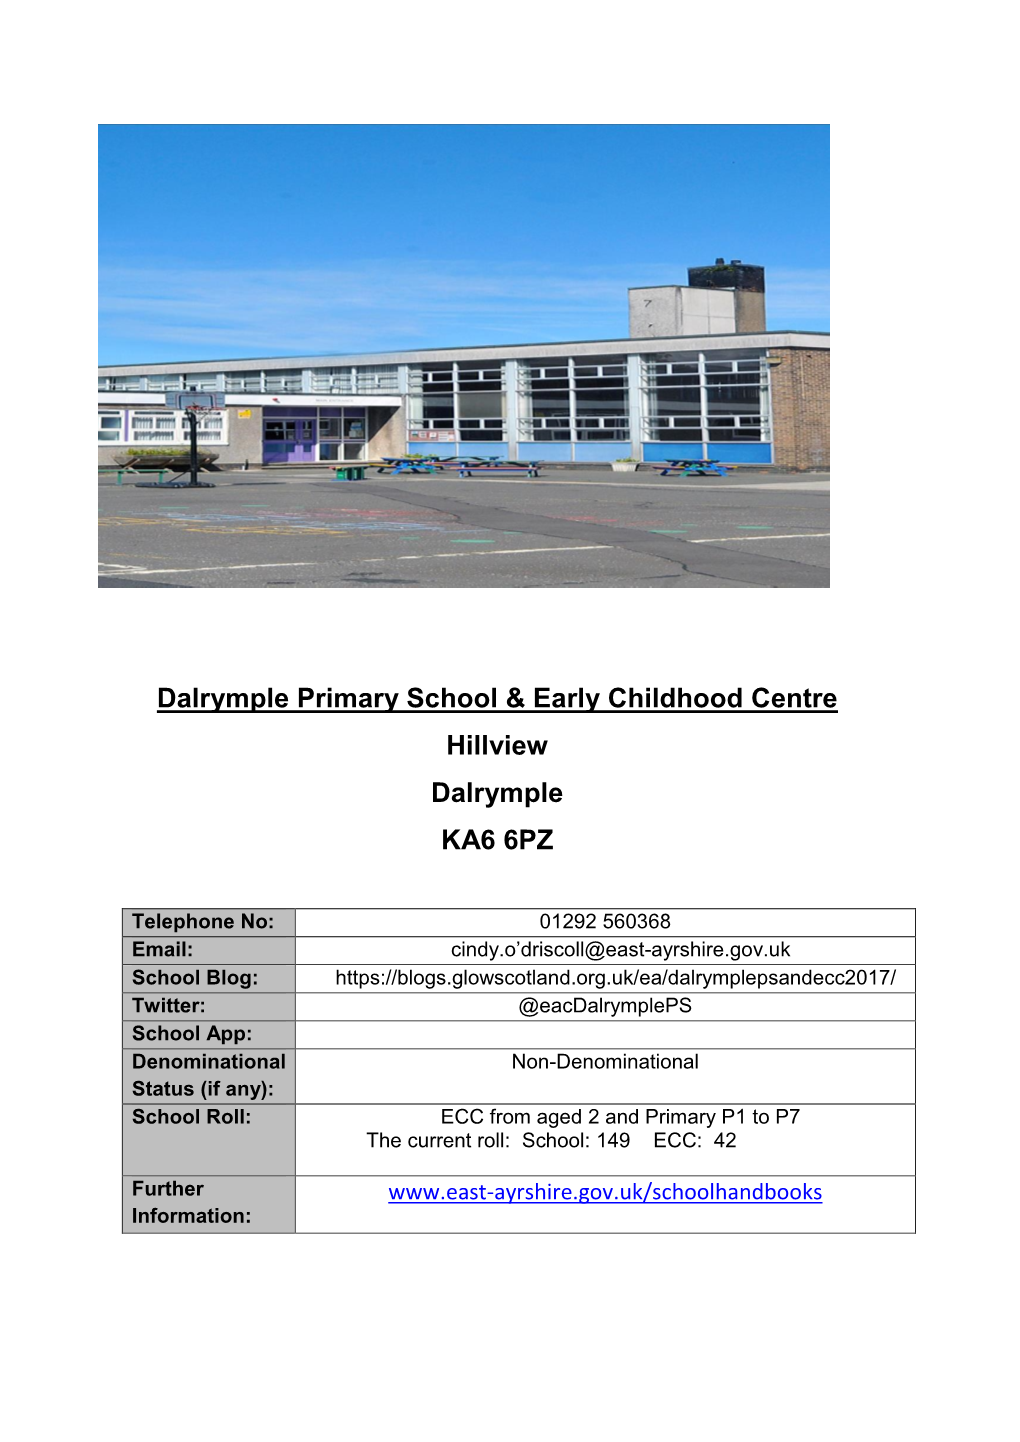 Dalrymple Primary School and Early Childhood Centre Handbook